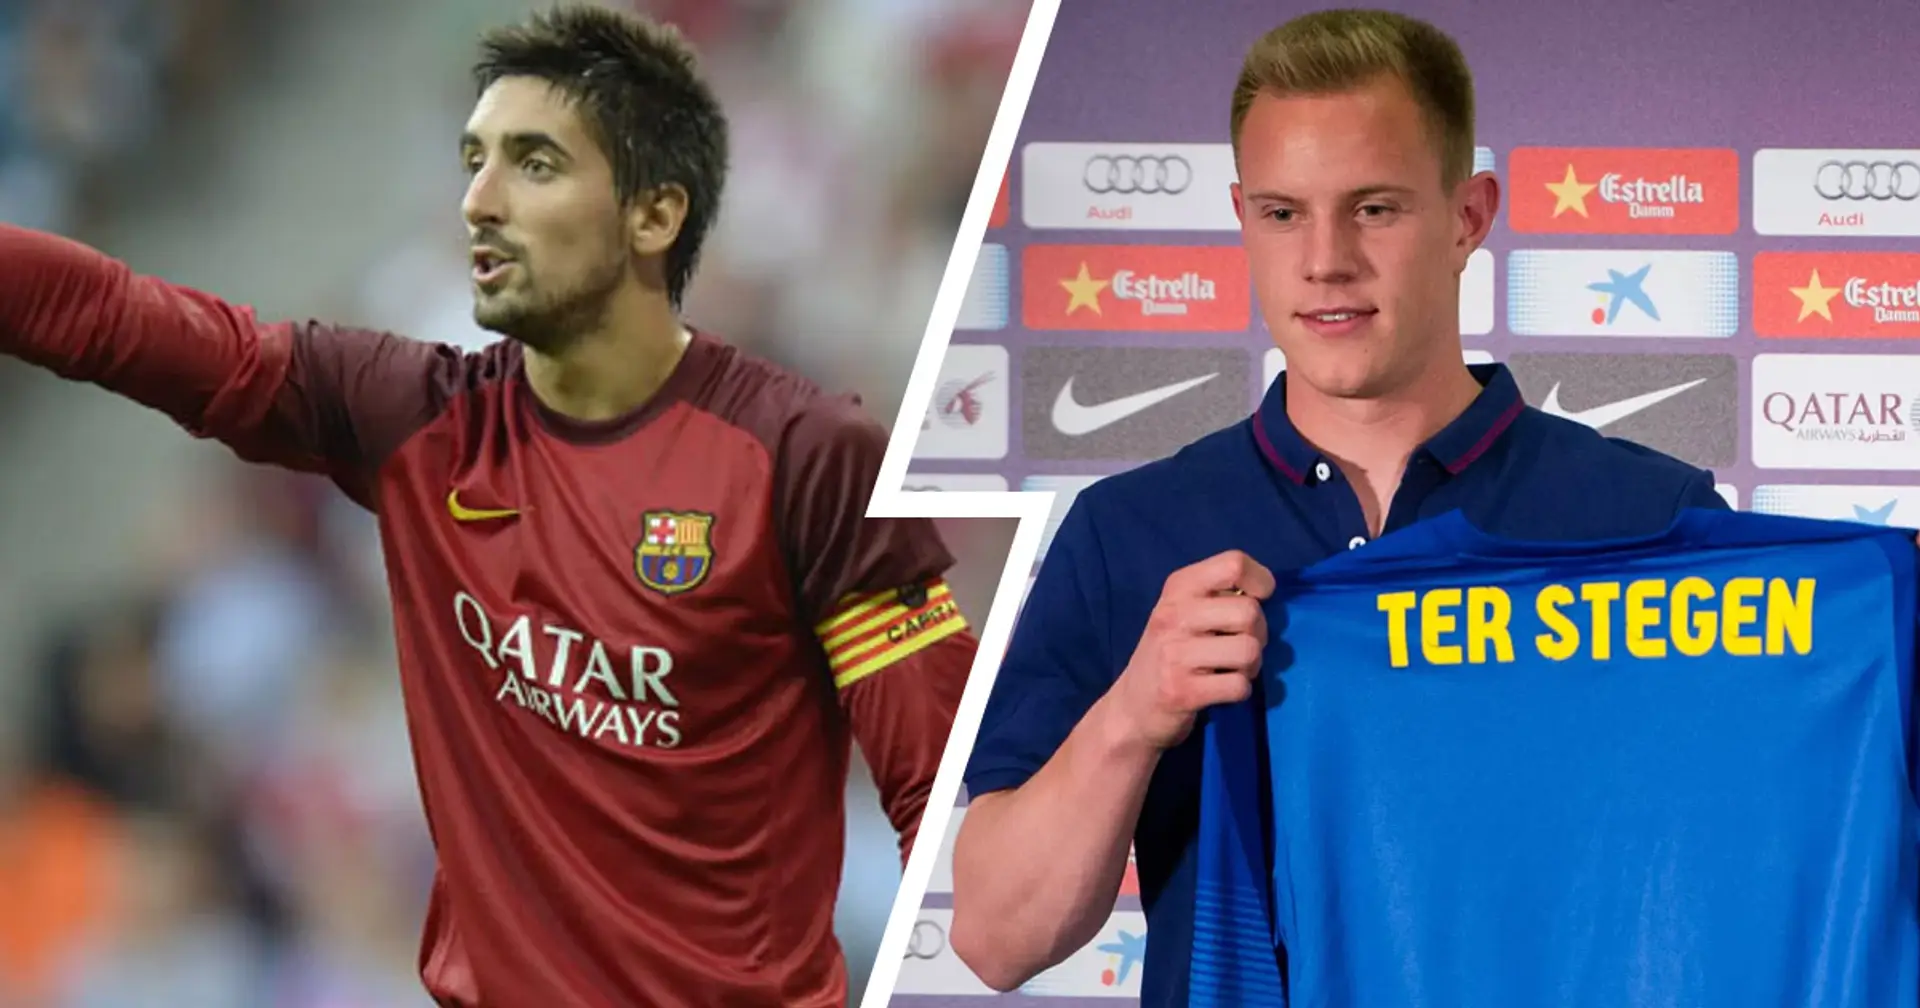 'But we have Oier...': How fans reacted to first rumours about Ter Stegen to Barcelona